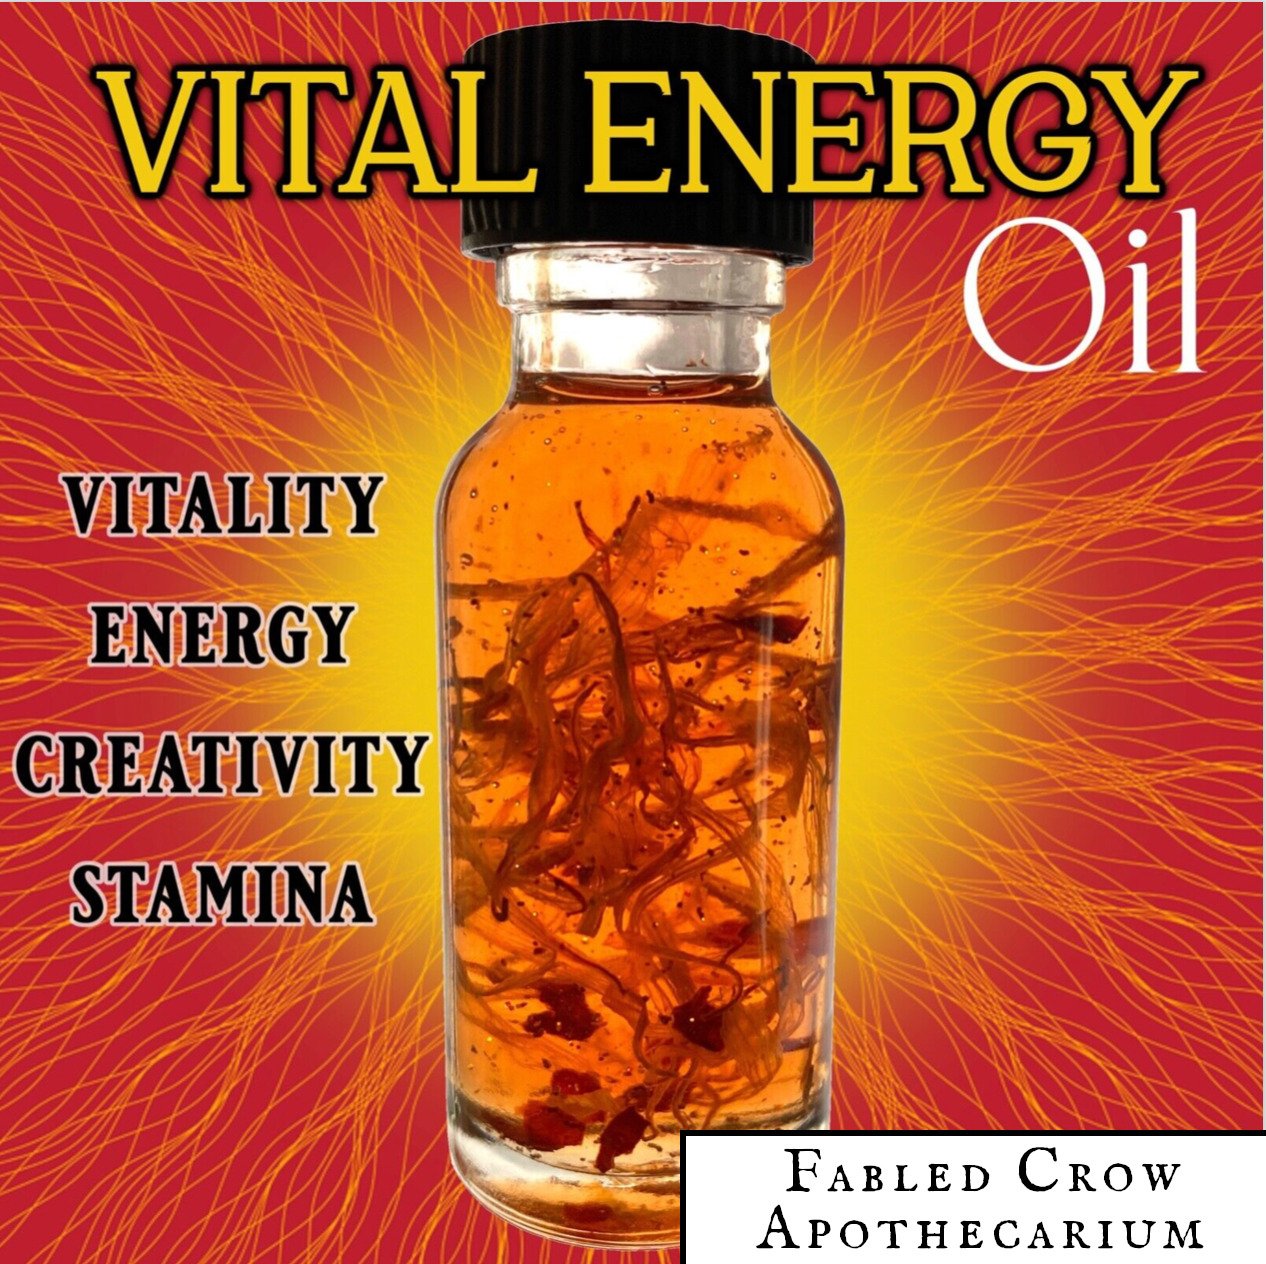 VITAL ENERGY Oil Creativity Vitality Success Witchcraft Hoodoo Pagan FABLED CROW